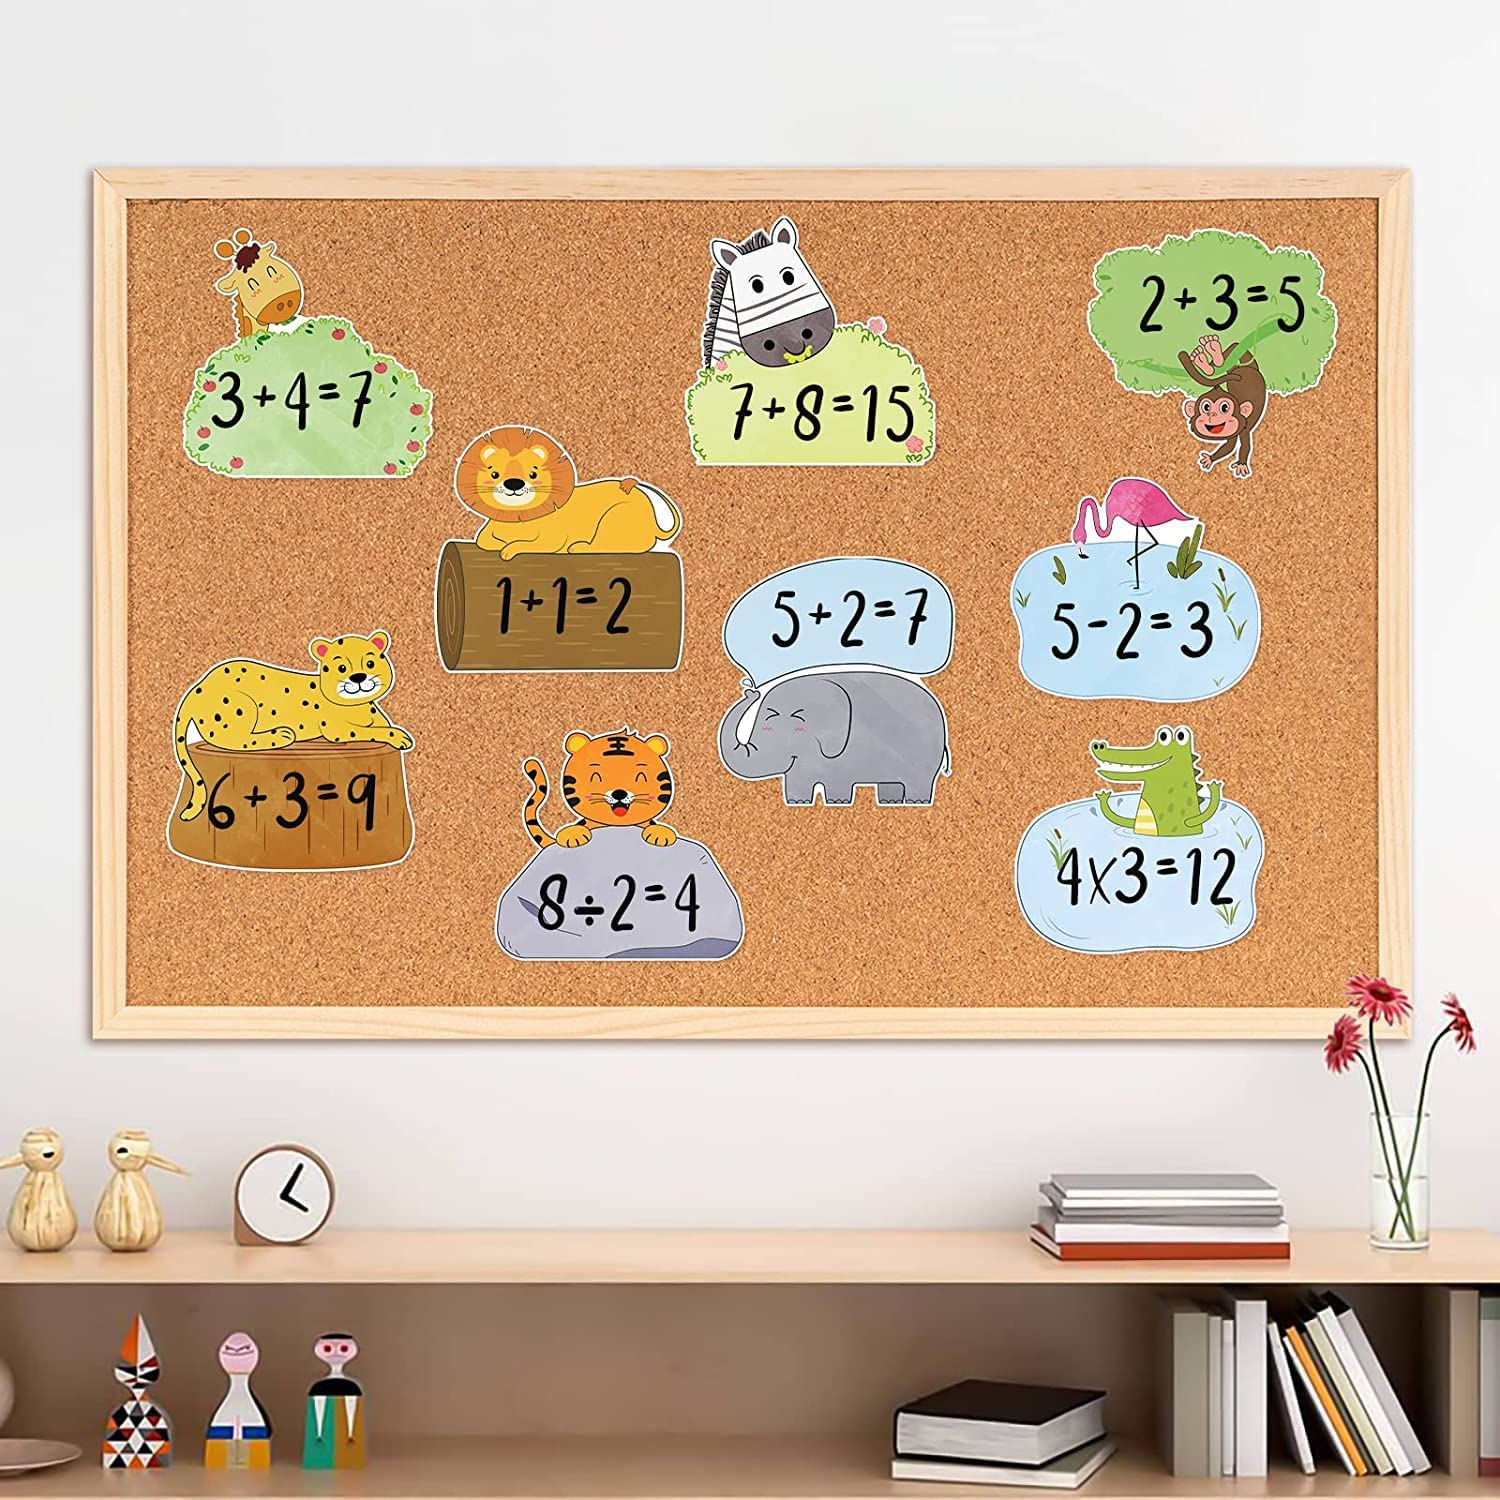 Shapes hung on board with a forest animal design for the classroom blackboard